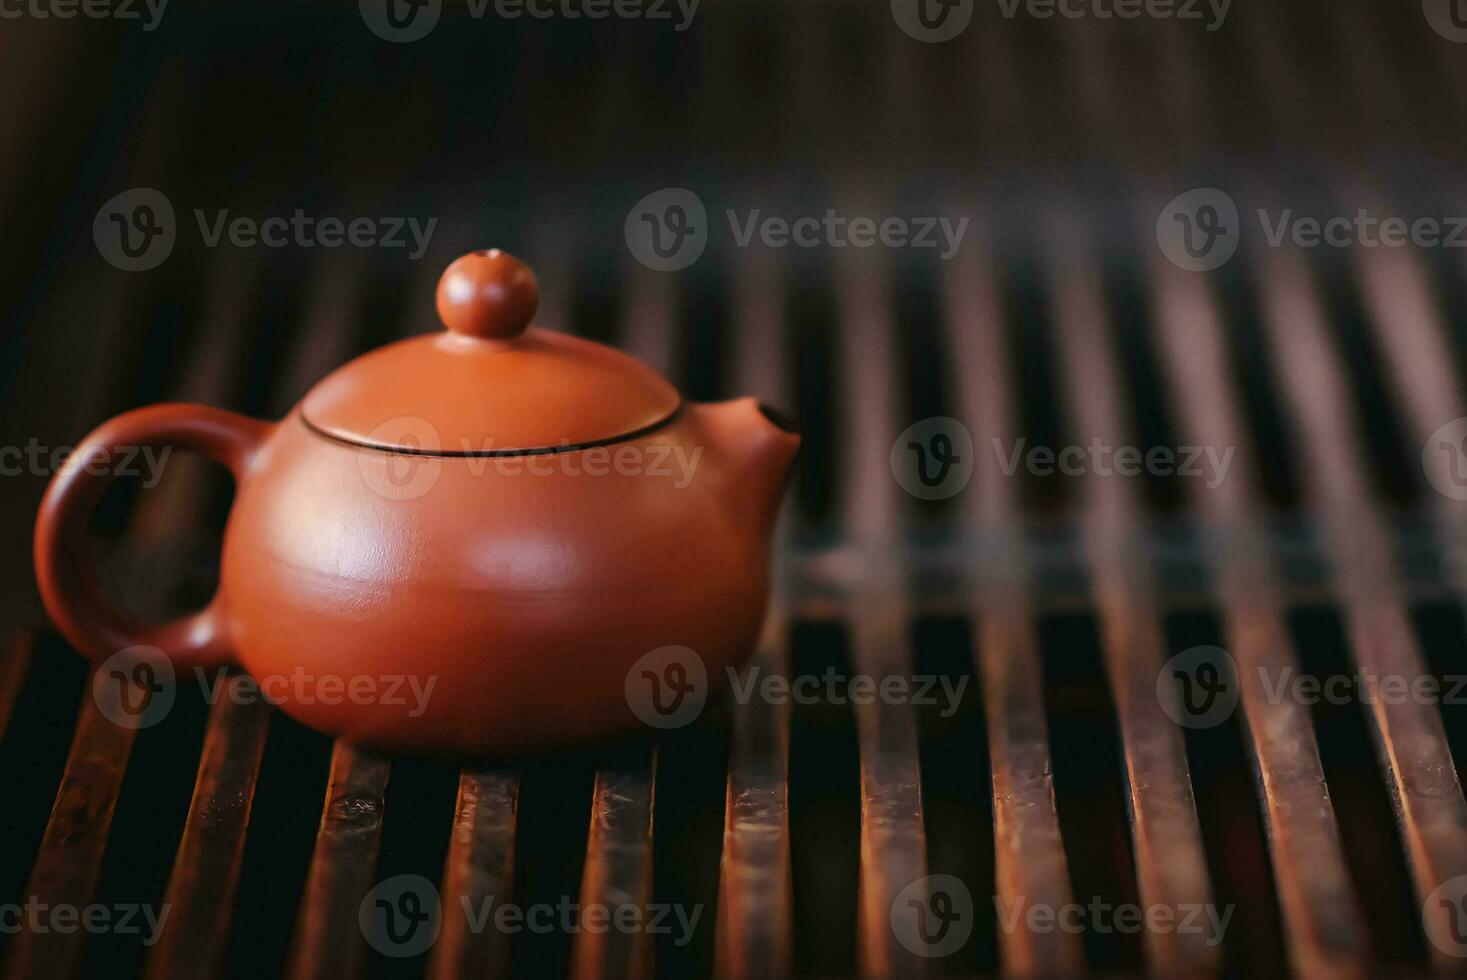 The teapot is on the tea table photo